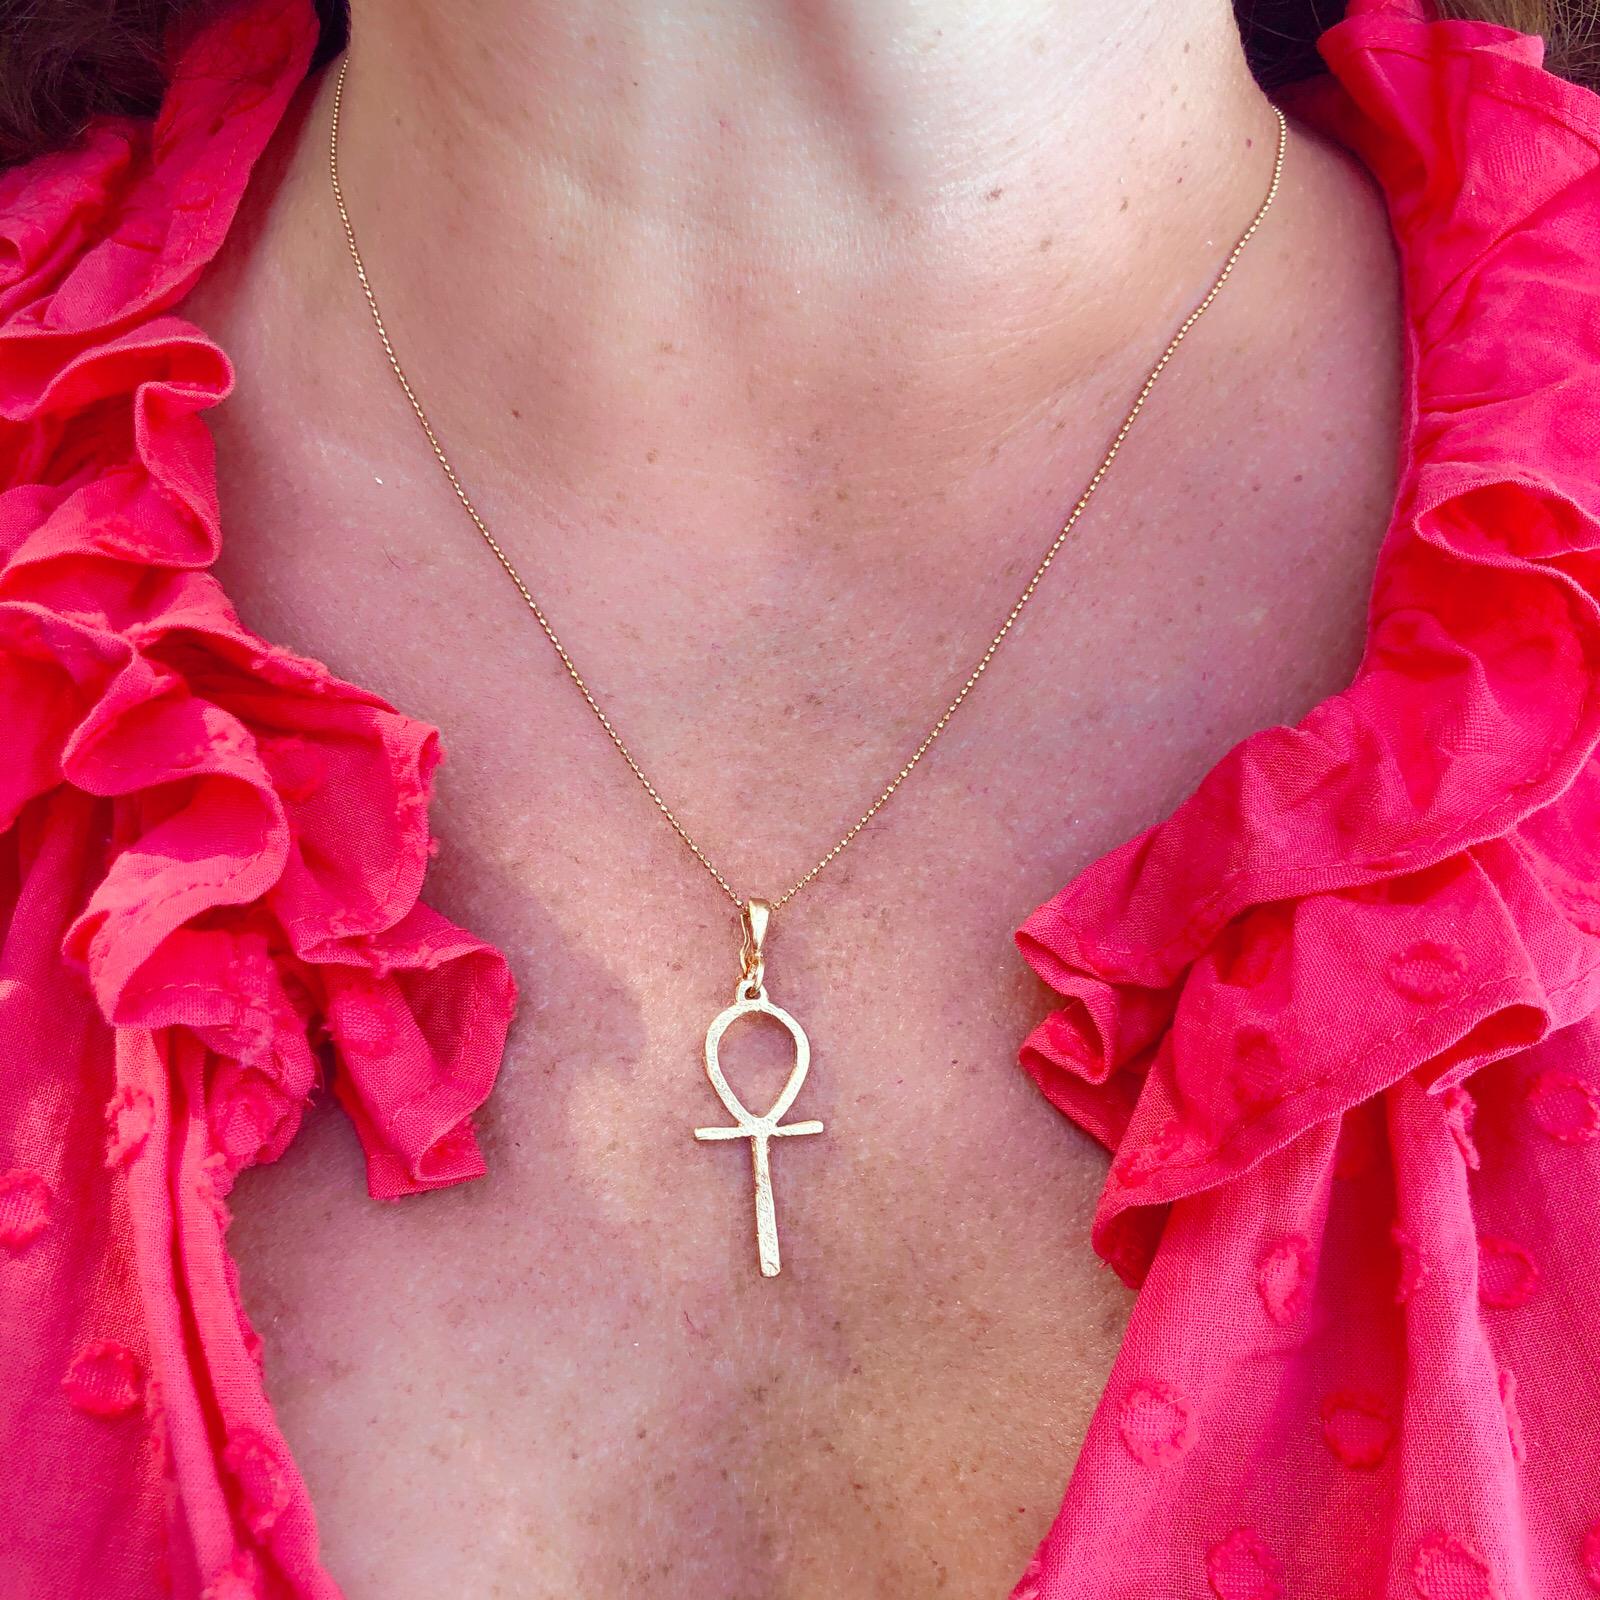 Iconic, collectible Dominique Cohen.  The ankh, also known as the key of life, was the ancient Egyptian hieroglyphic character for life and represents the concept of eternal life. The 18k gold pendant-enhancer, measuring 1 5/8in., is suspended from